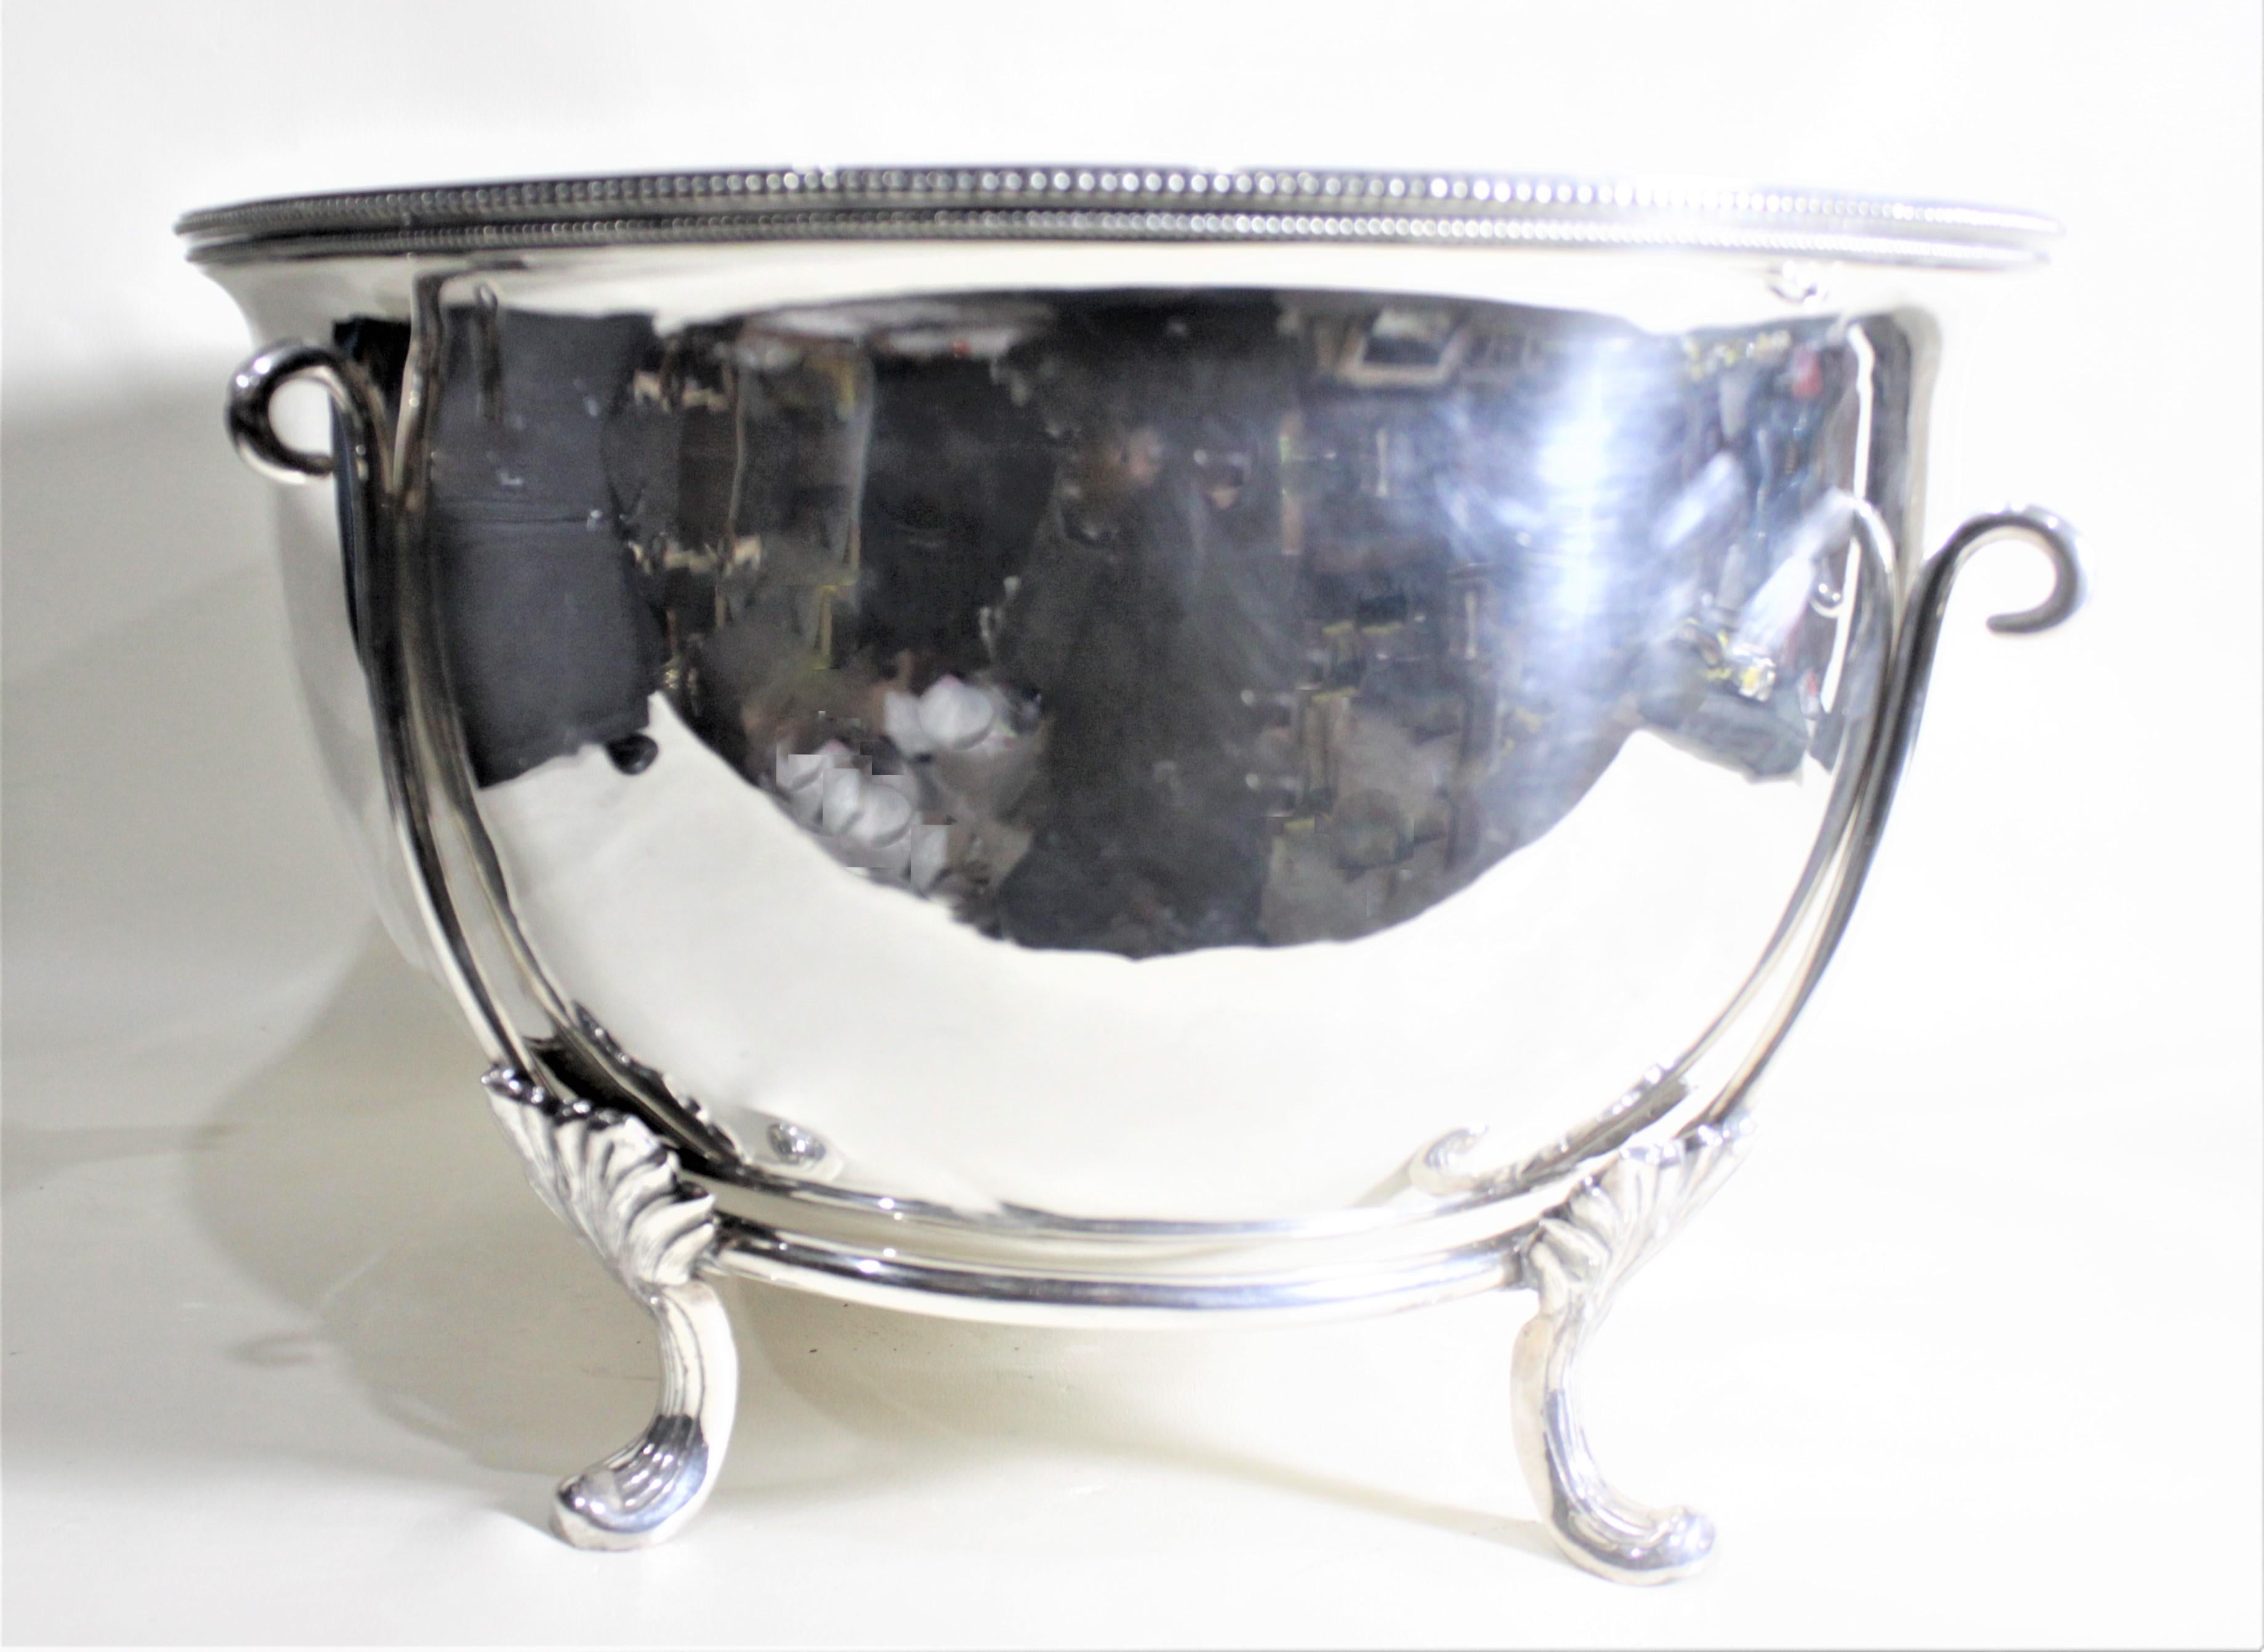 This extremely large and substantial ice trough or centerpiece is a marriage of an inverted huge meat dome with a custom made stand. The meat dome has no maker's mark, but presumed to have been made in England in circa 1890. The handle of the dome